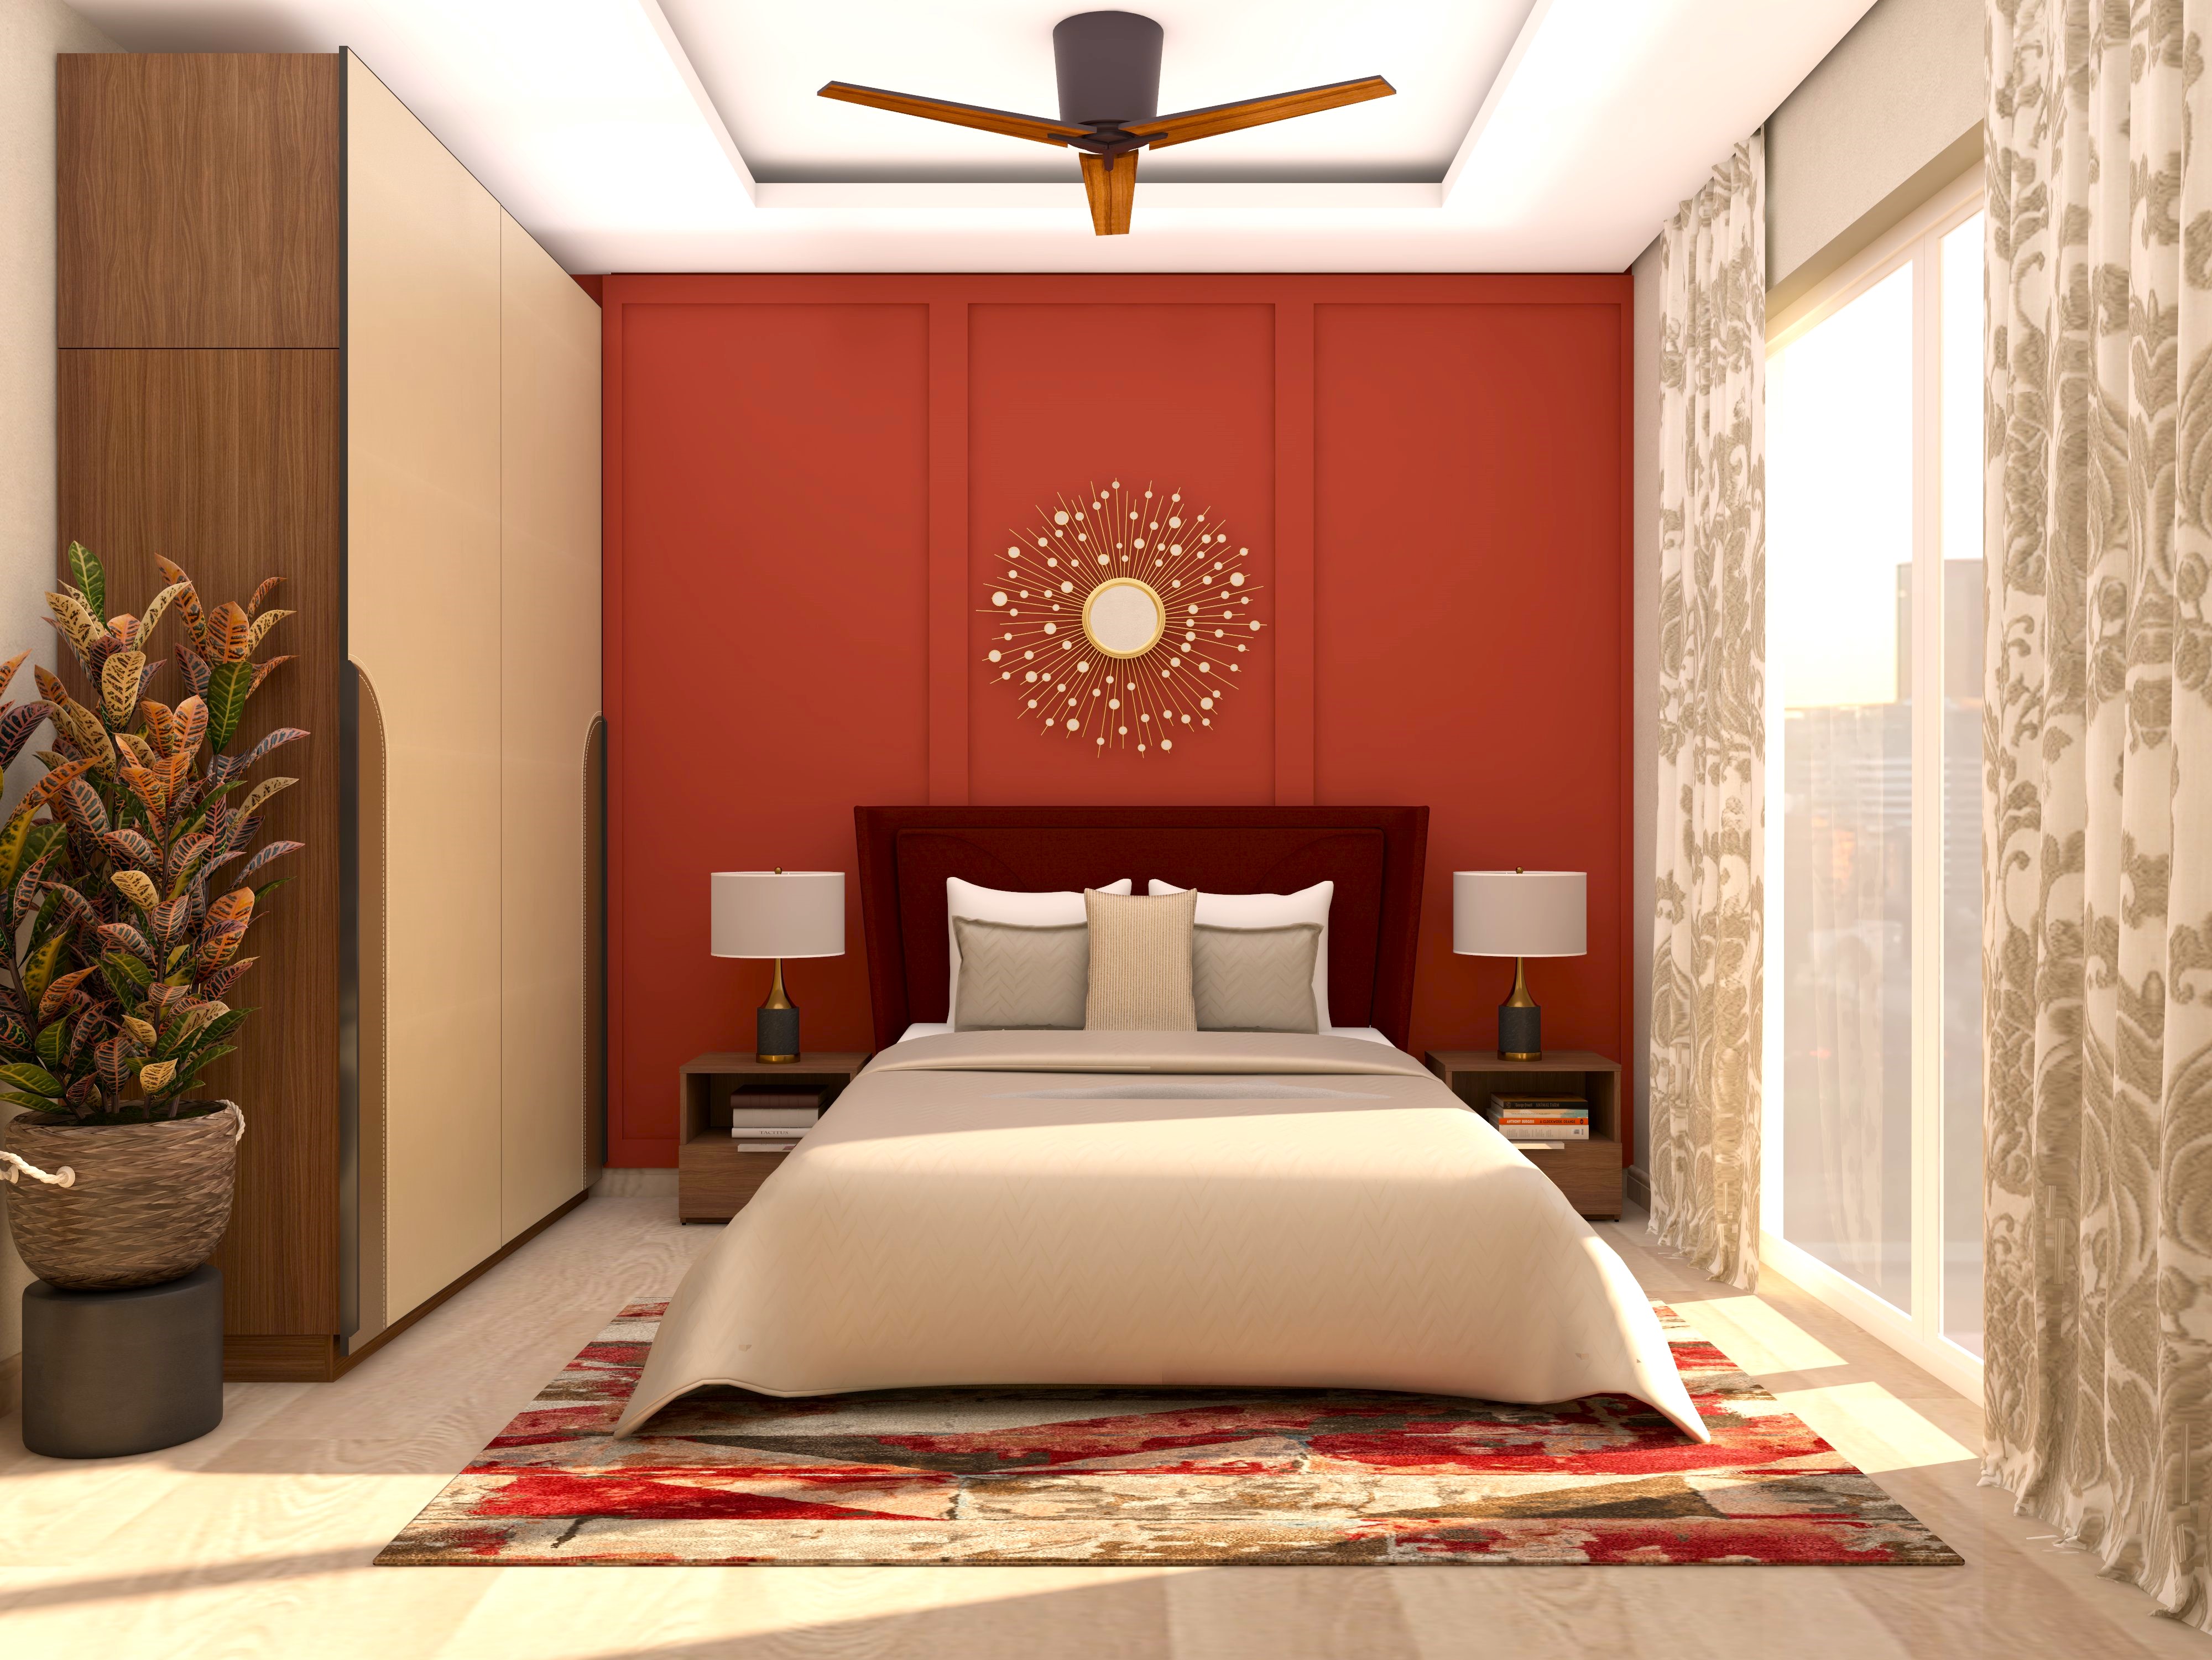 Guest bedroom with red wall paneling and wooden headboard-Beautiful Homes